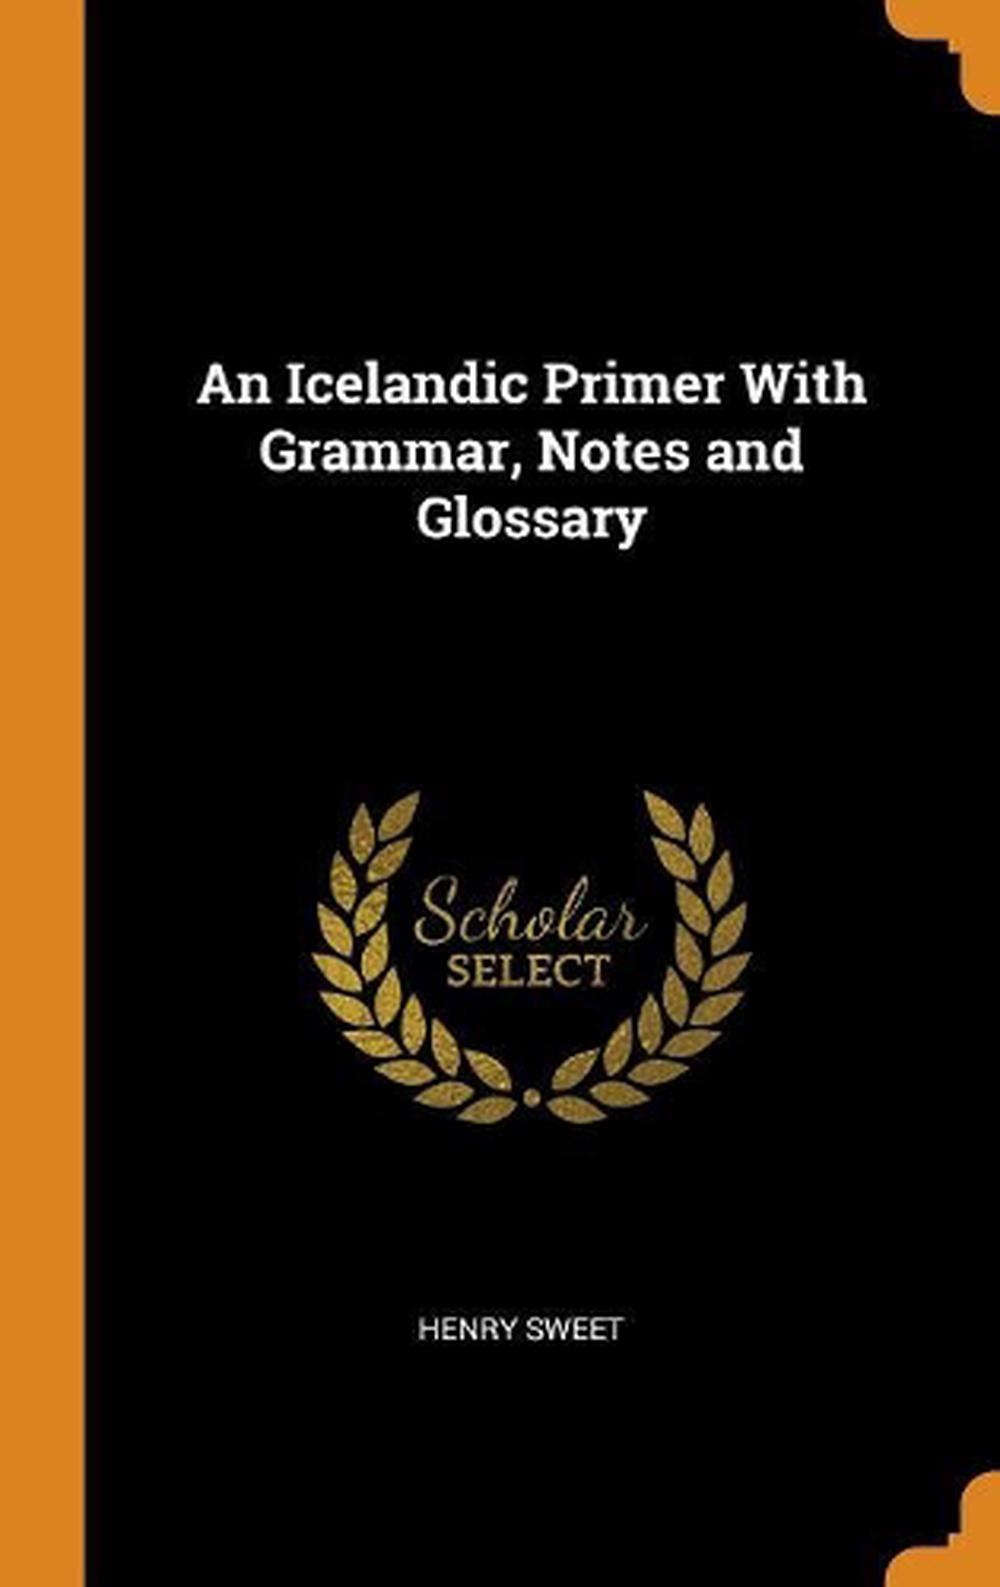 Icelandic Primer With Grammar, Notes and Glossary by Henry Sweet